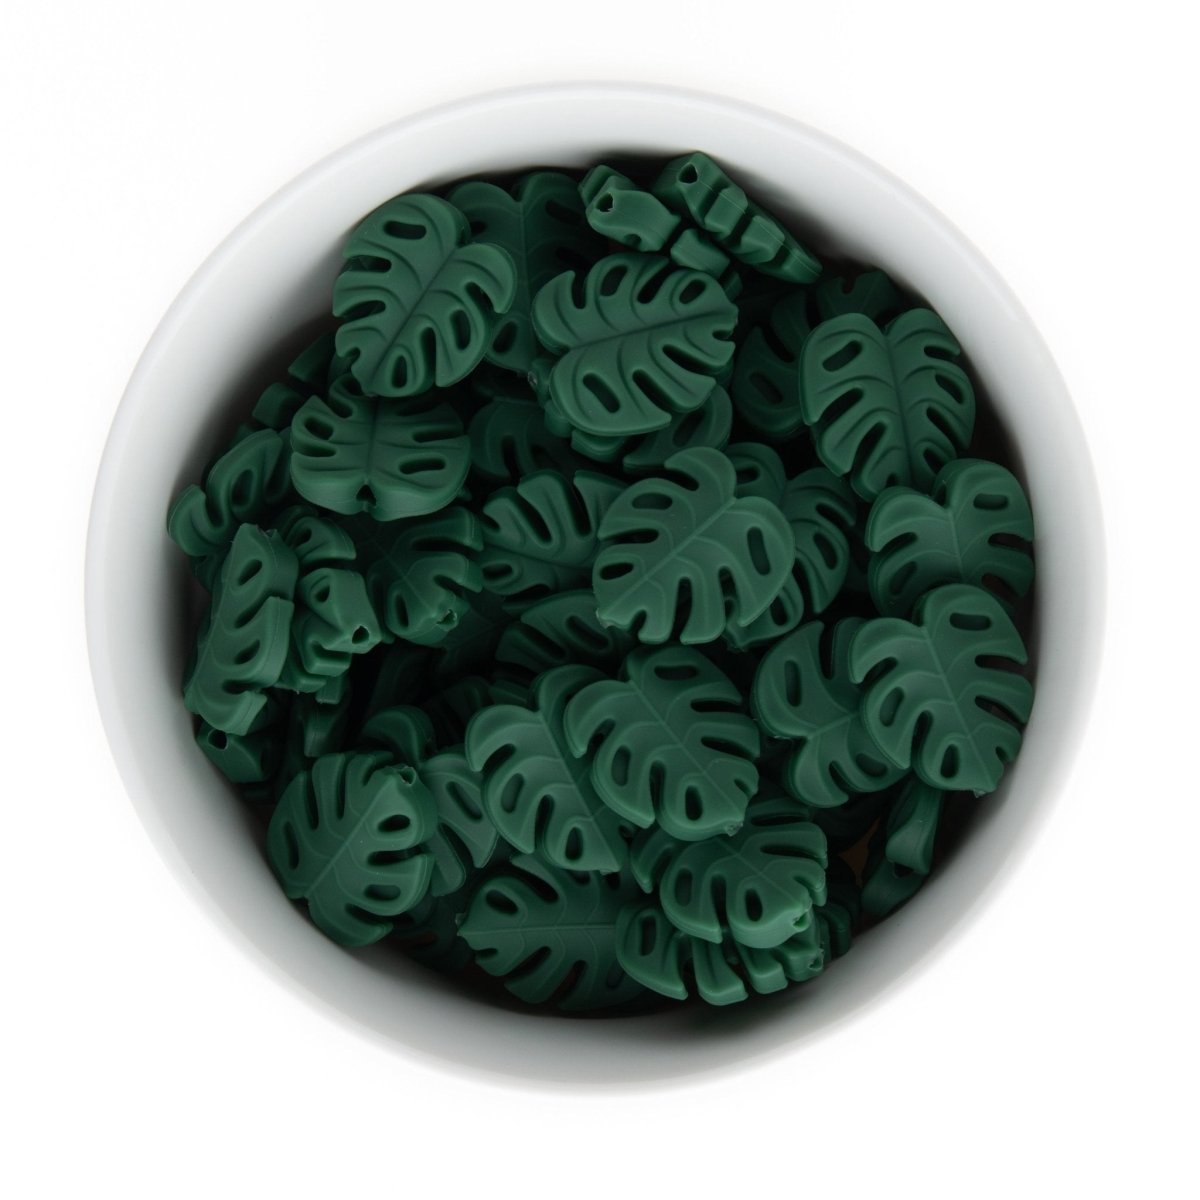 Silicone Focal Beads Monstera Leaves English Ivy from Cara & Co Craft Supply